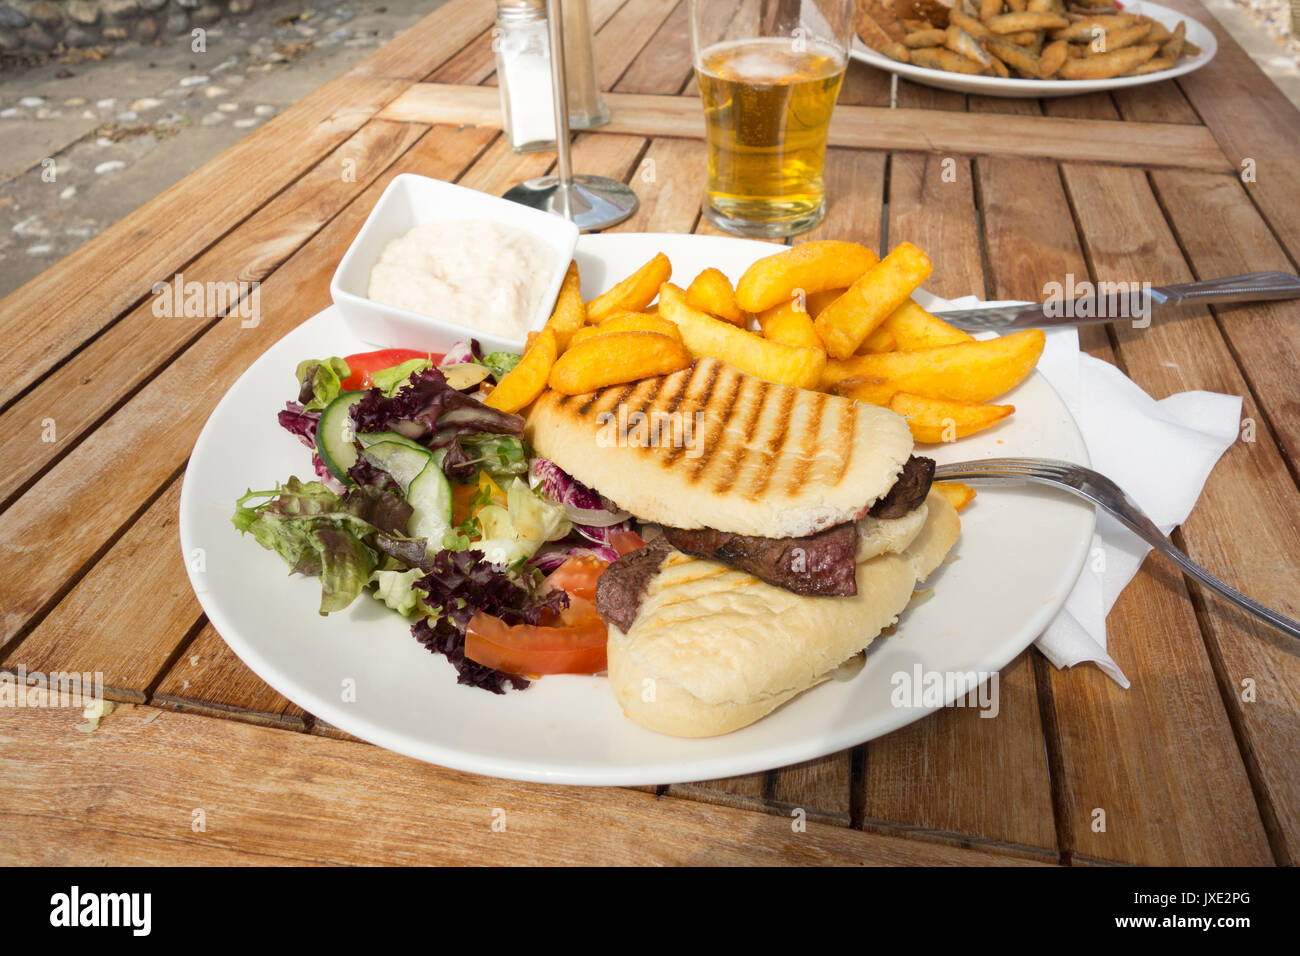 Steak panini meal with chips and side salad Stock Photo